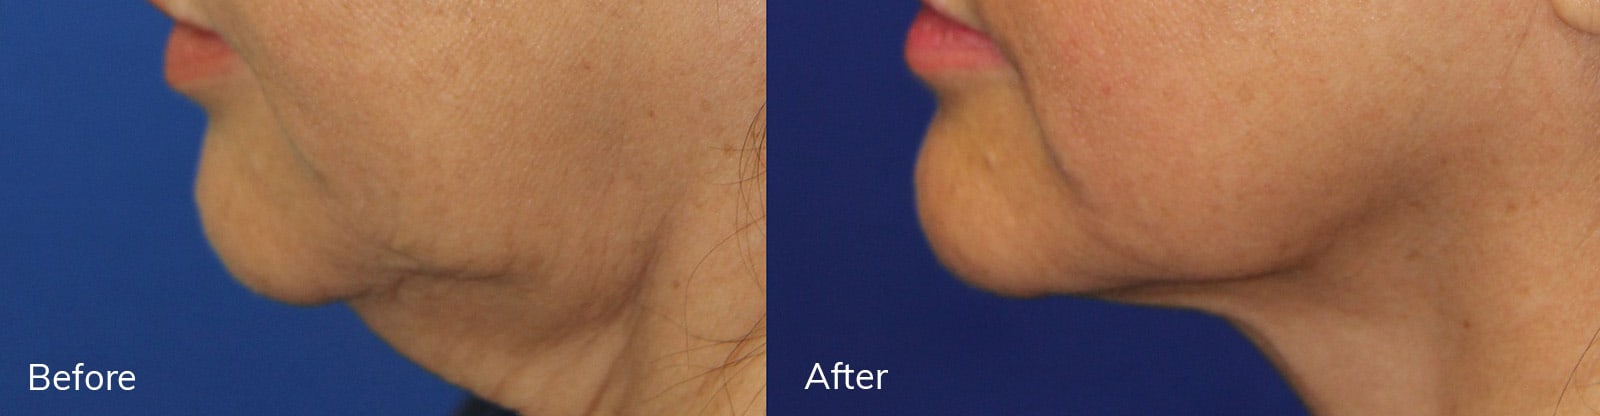 Loose Neck Skin, Double Chin Surgery, Get Rid of Double Chin Fat, SkinFX Canada in Surrey